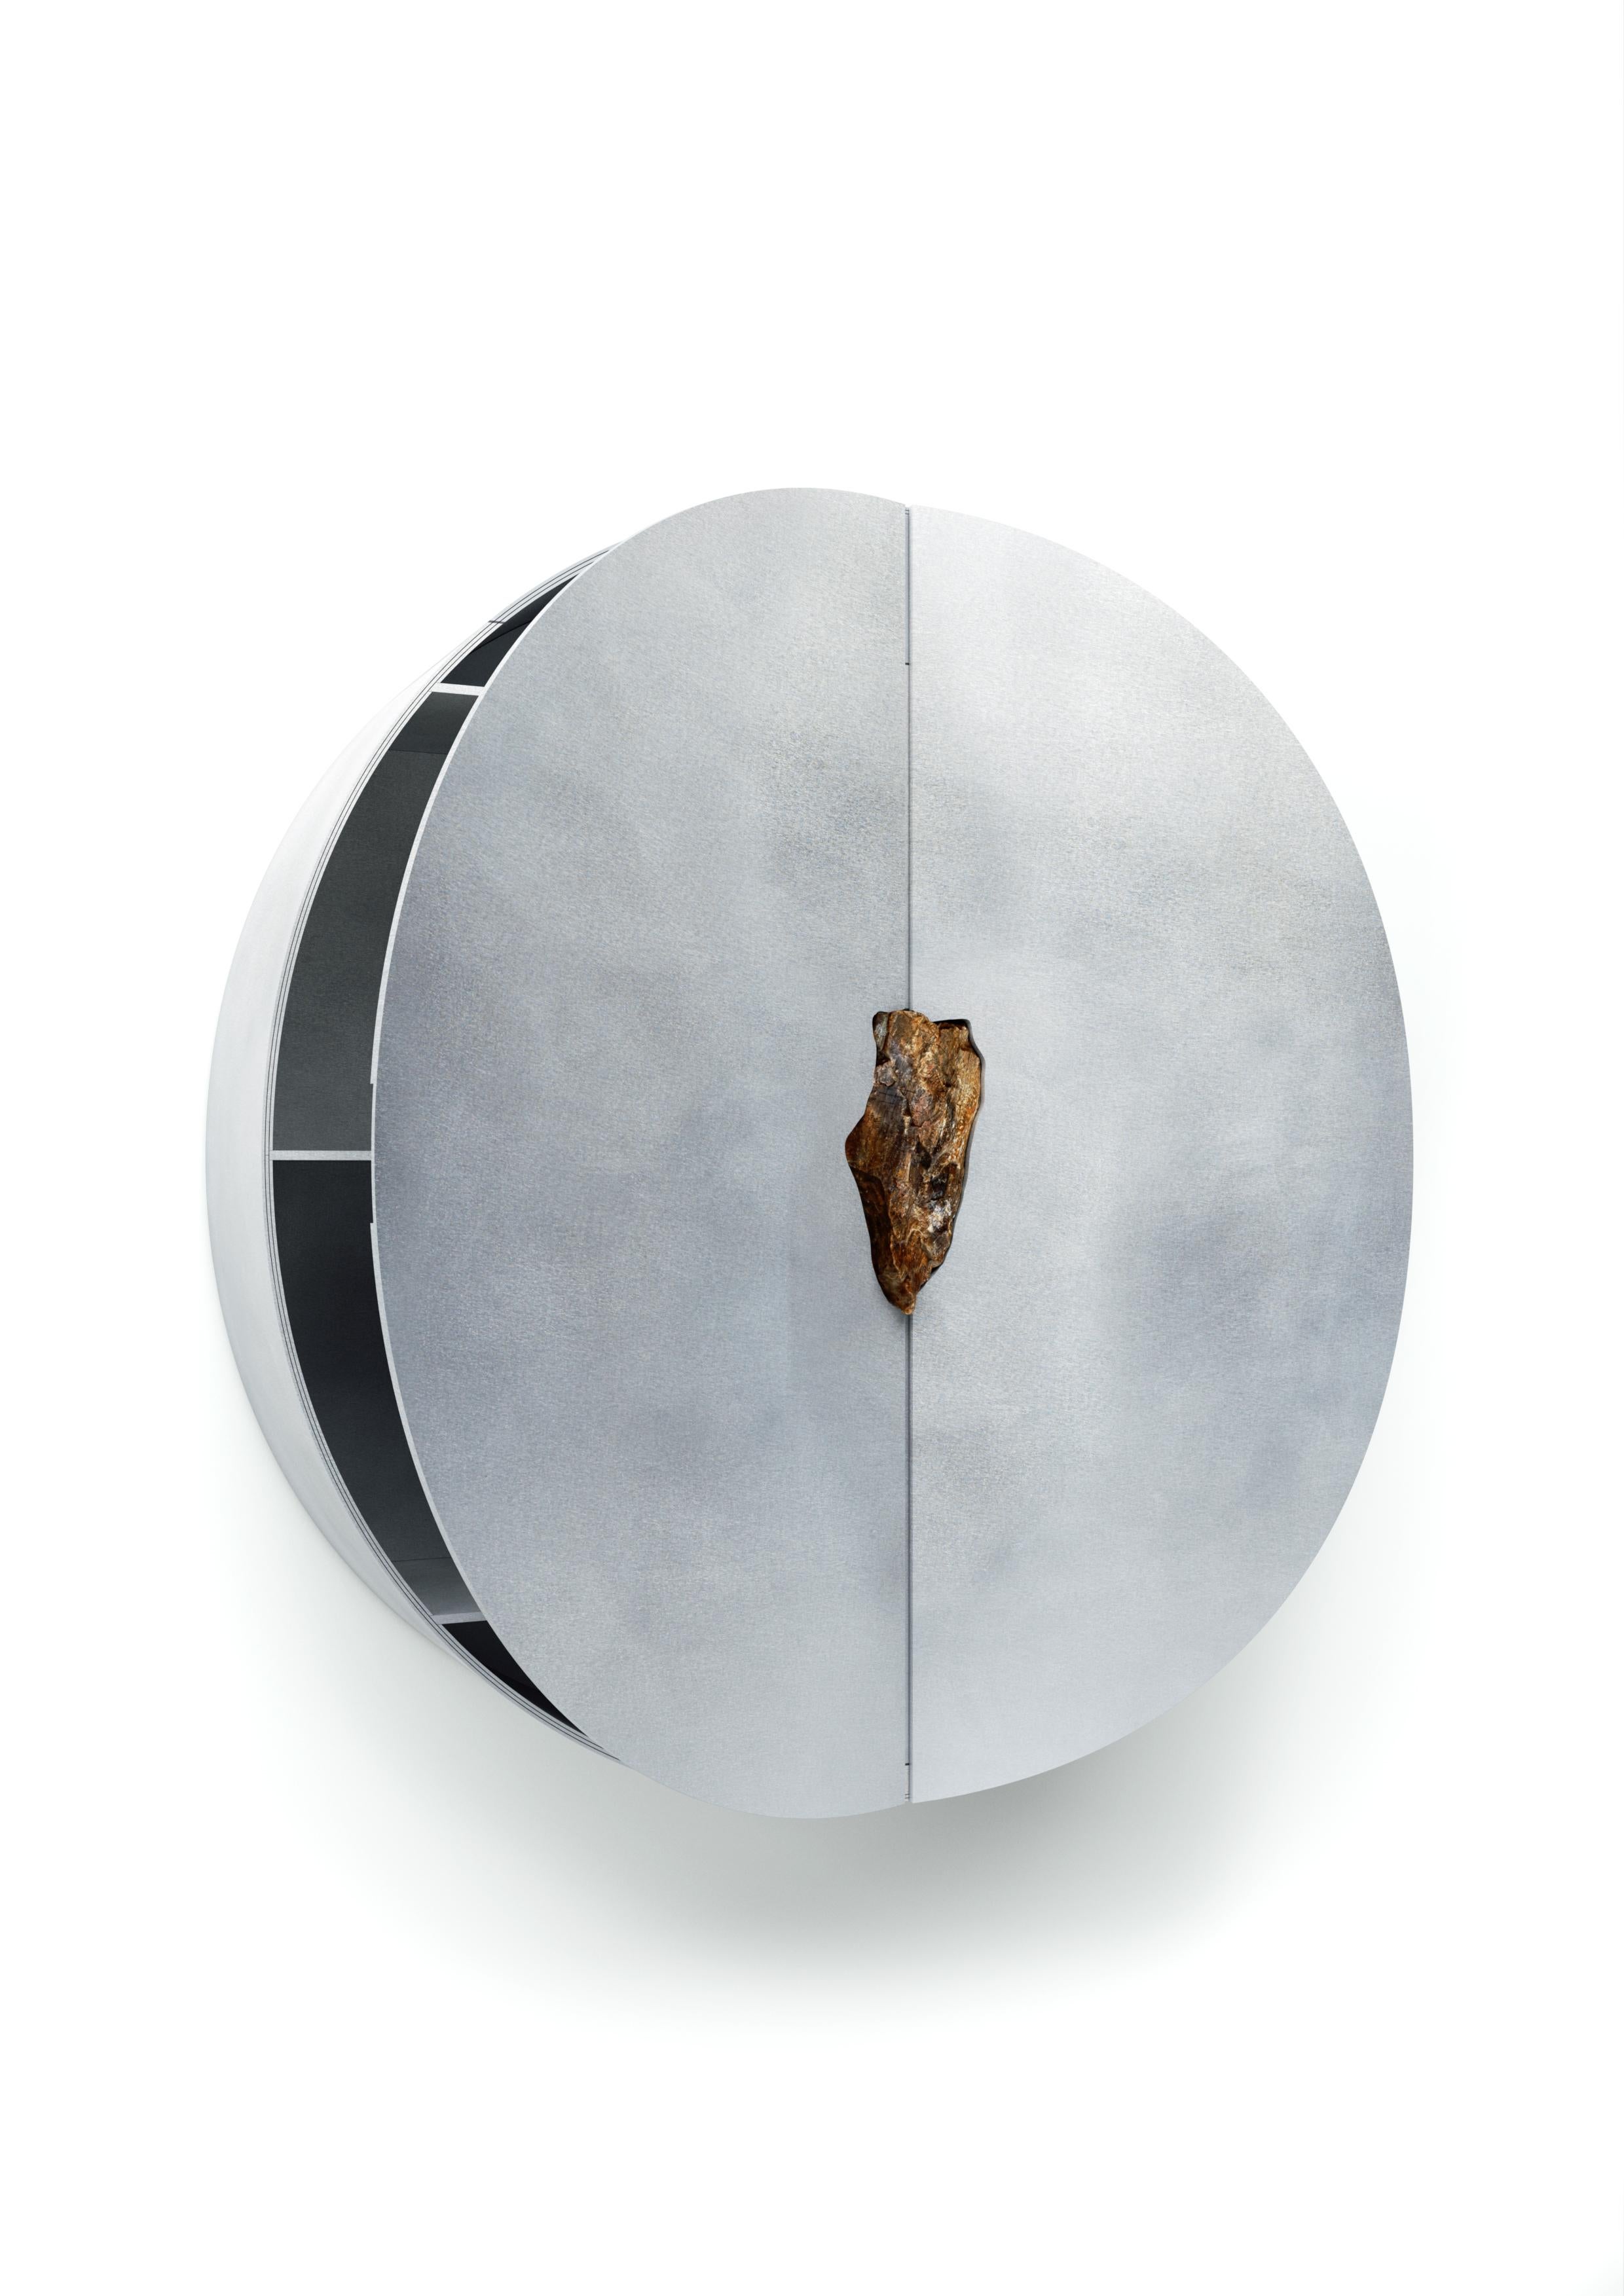 Hand-Crafted Oxidized and Waxed Aluminium Round Cabinet Petrified Wood by Pierre De Valck For Sale